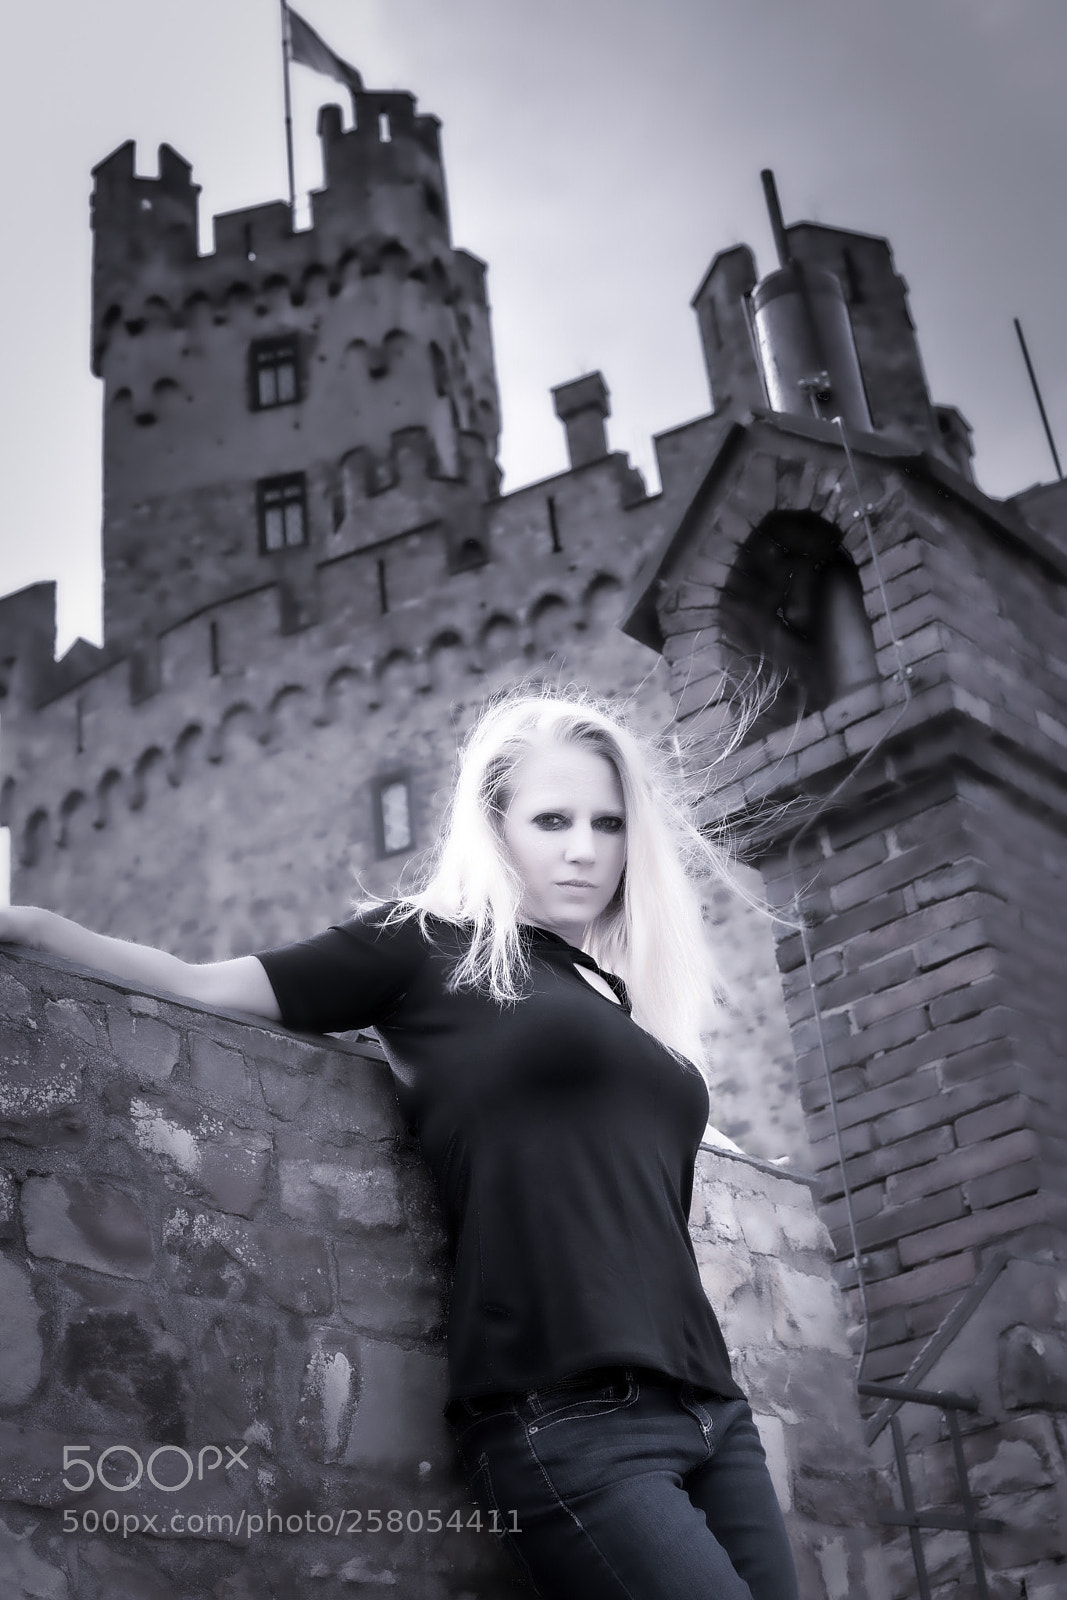 Sony a6300 sample photo. Hotness meets castle photography